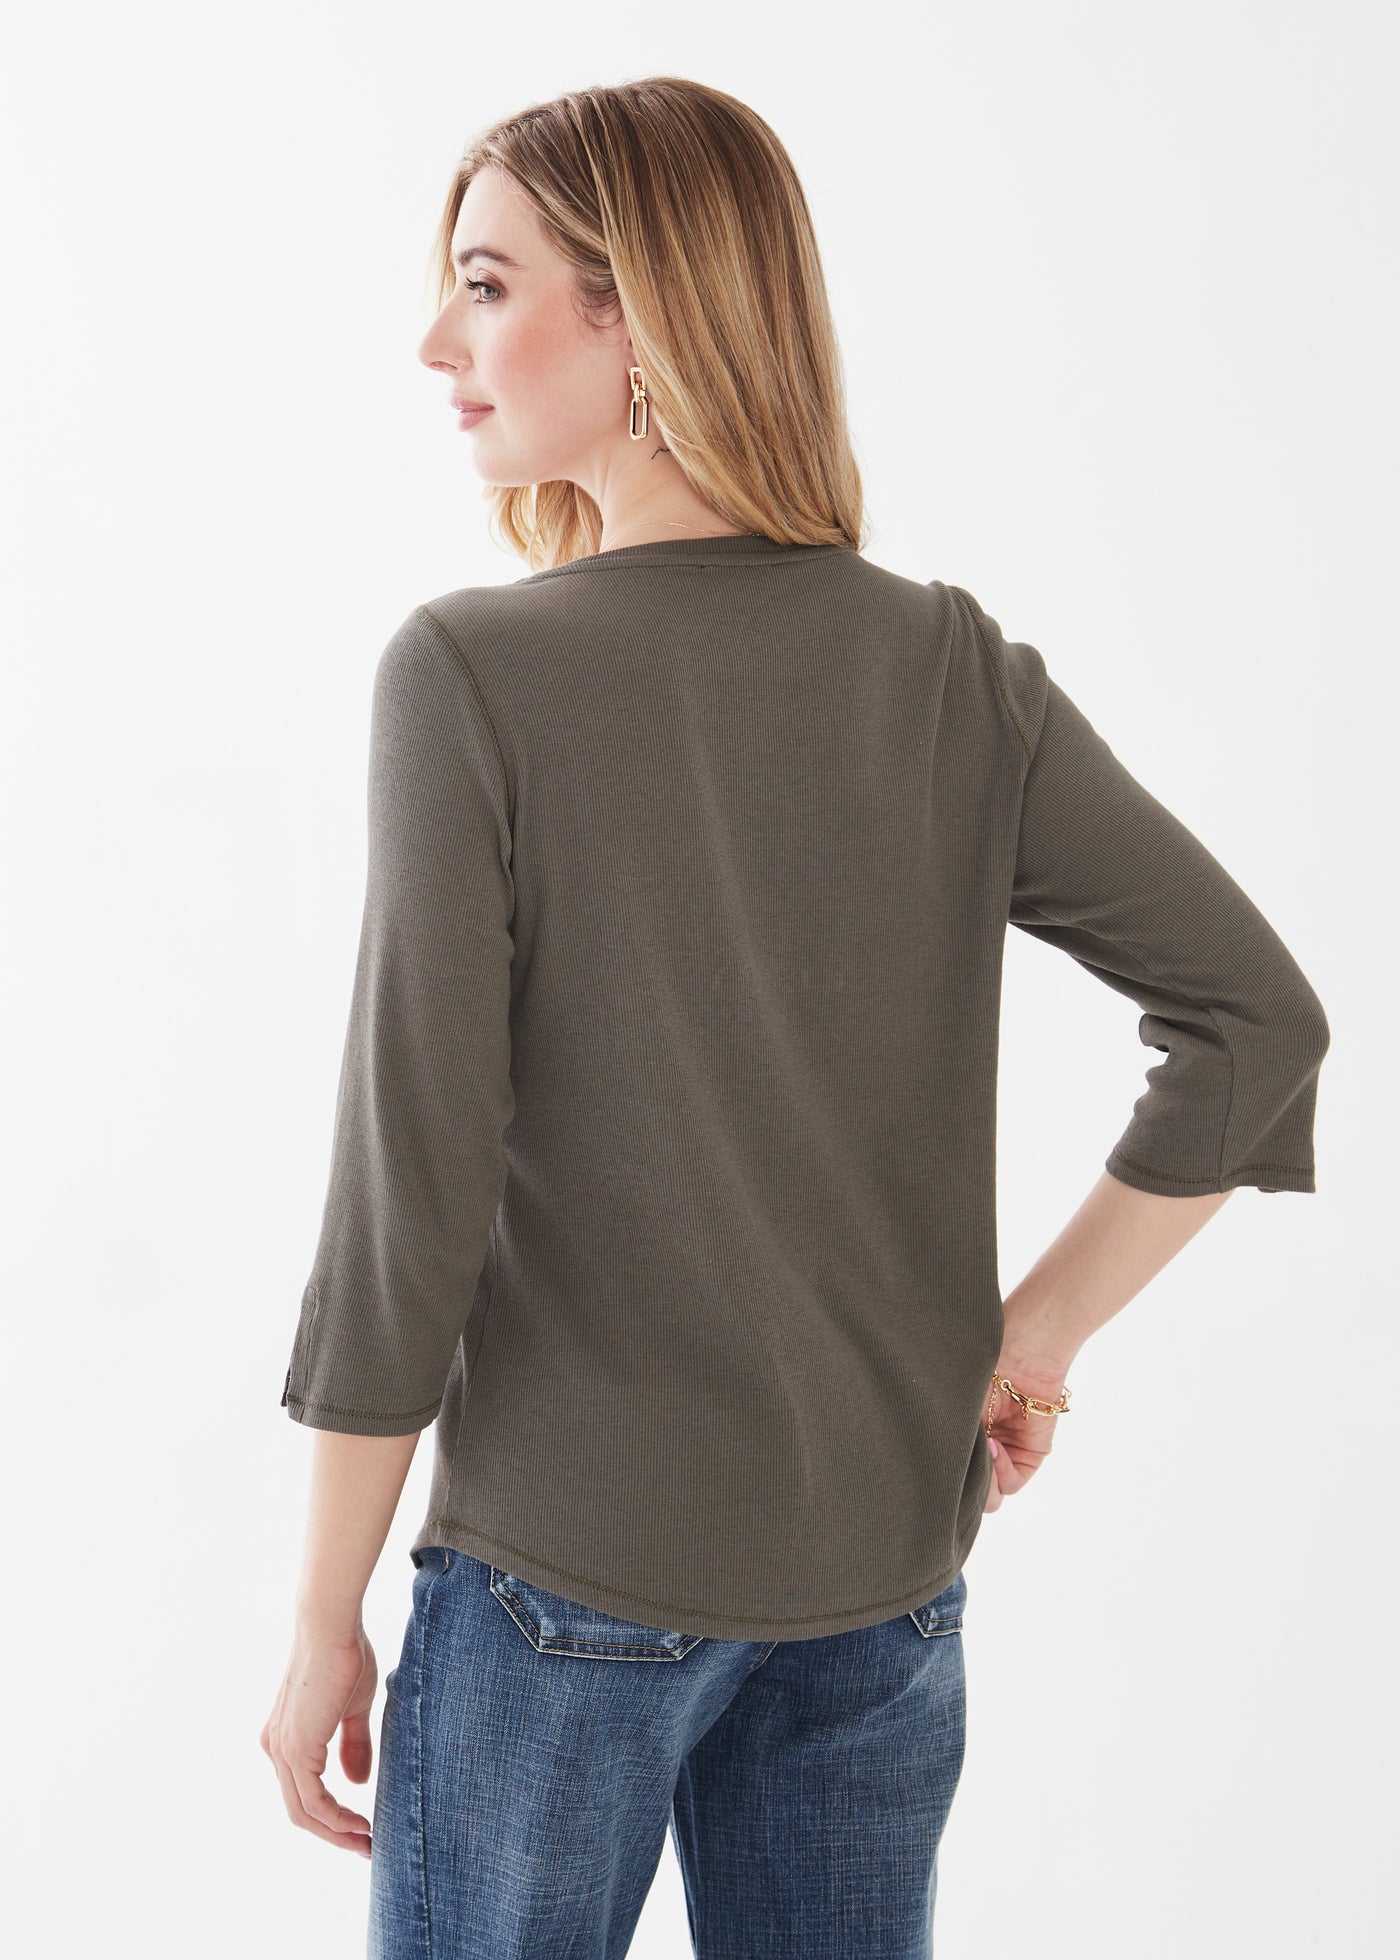 French Dressing Jeans 3/4 Sleeve Scoop Neck Top 